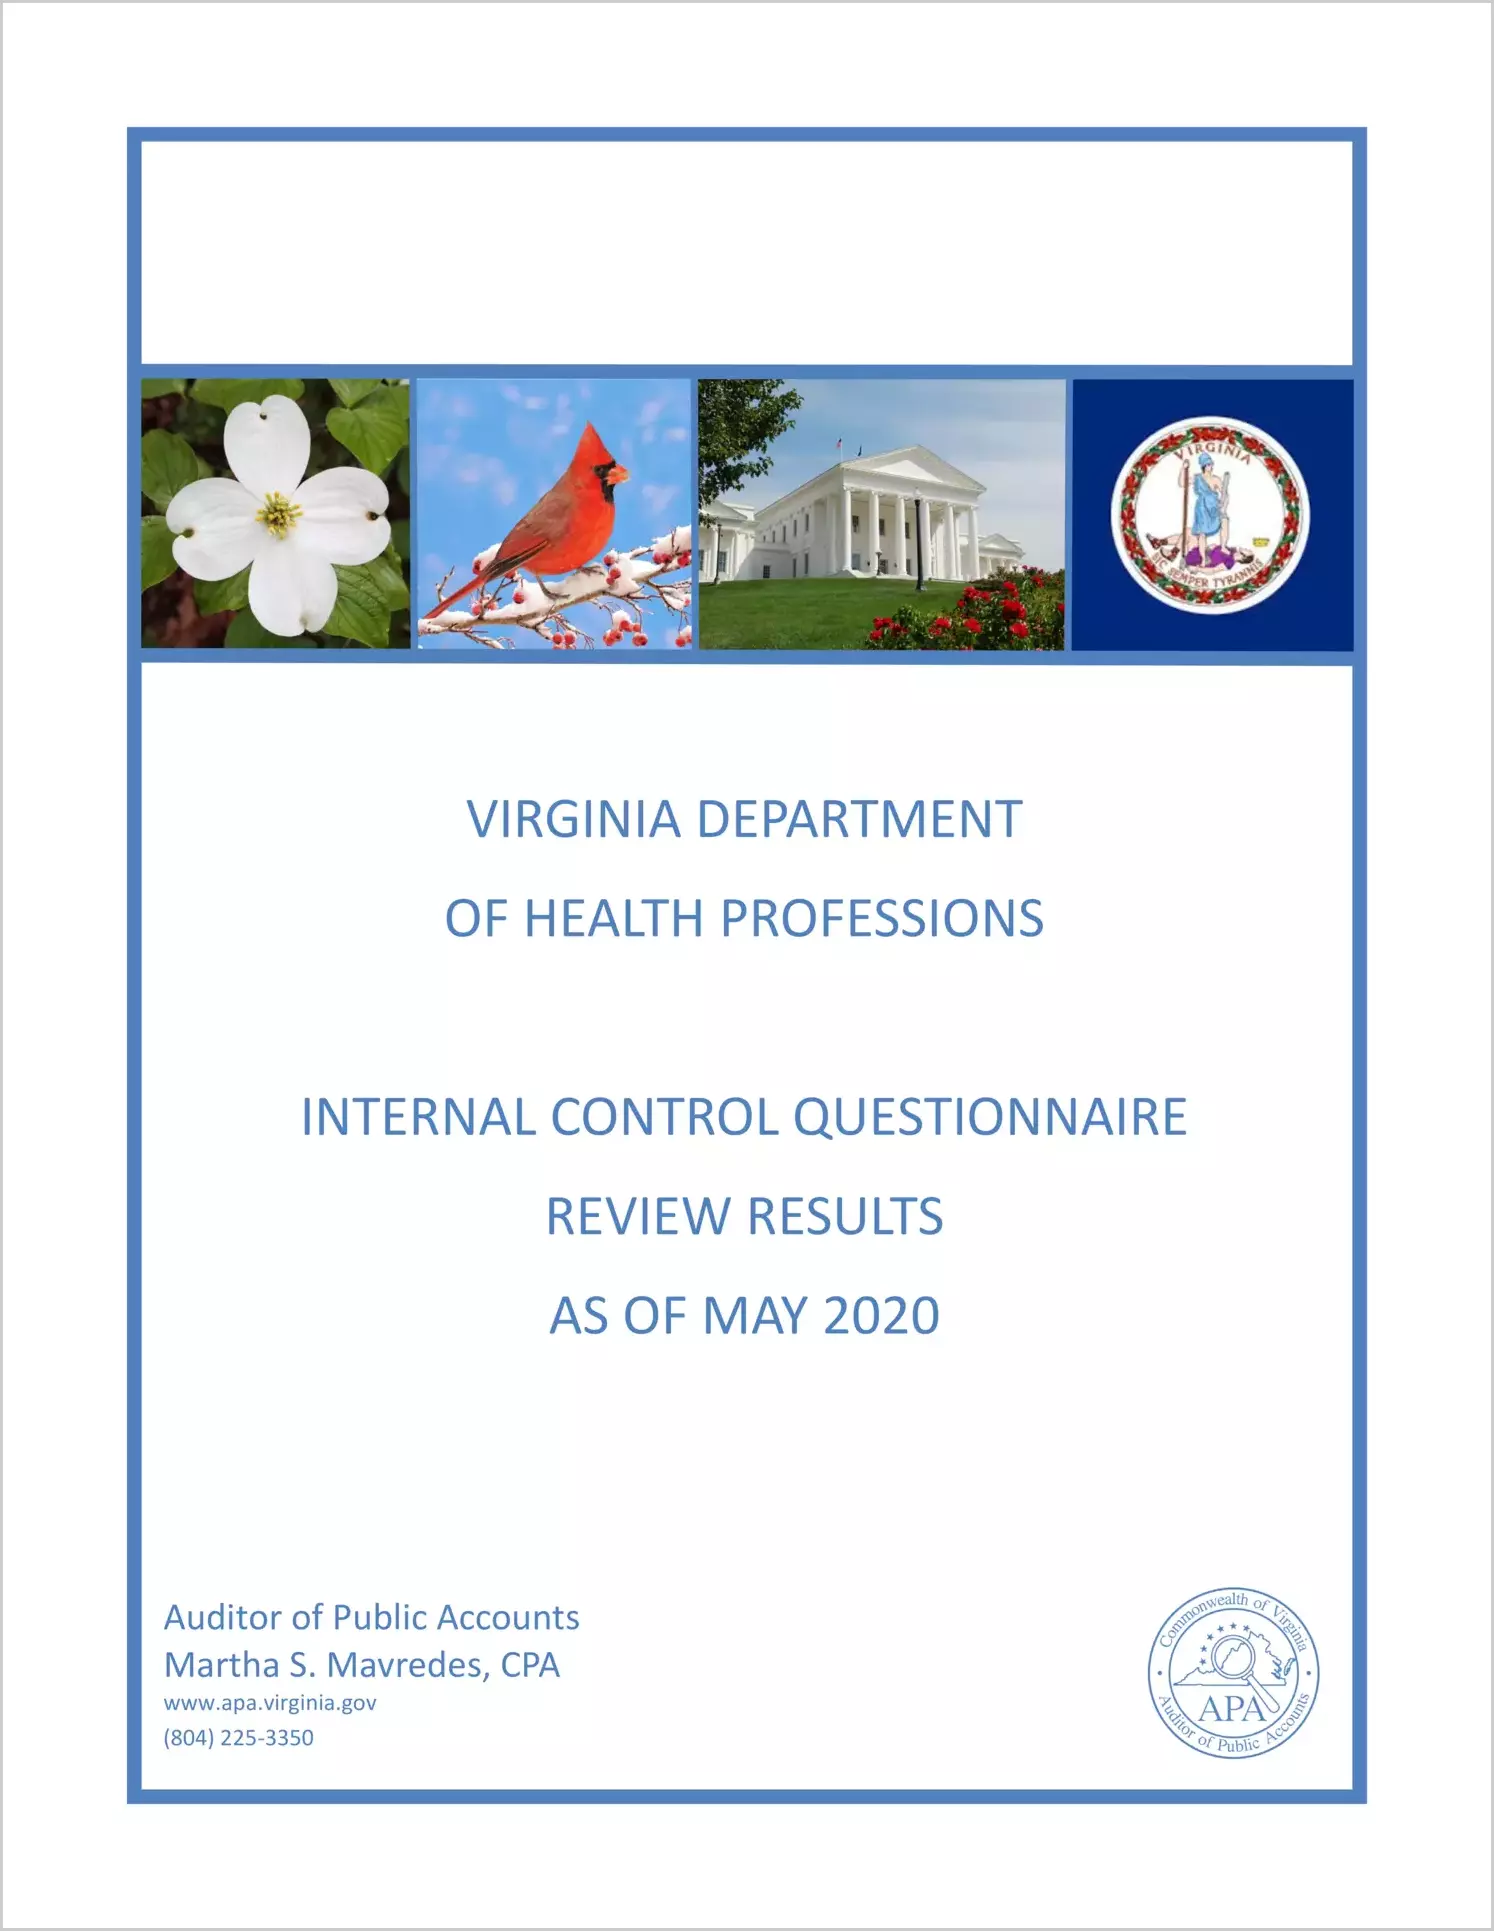 Virginia Department of Health Professions Internal Control Questionnaire Review Results as of May 2020